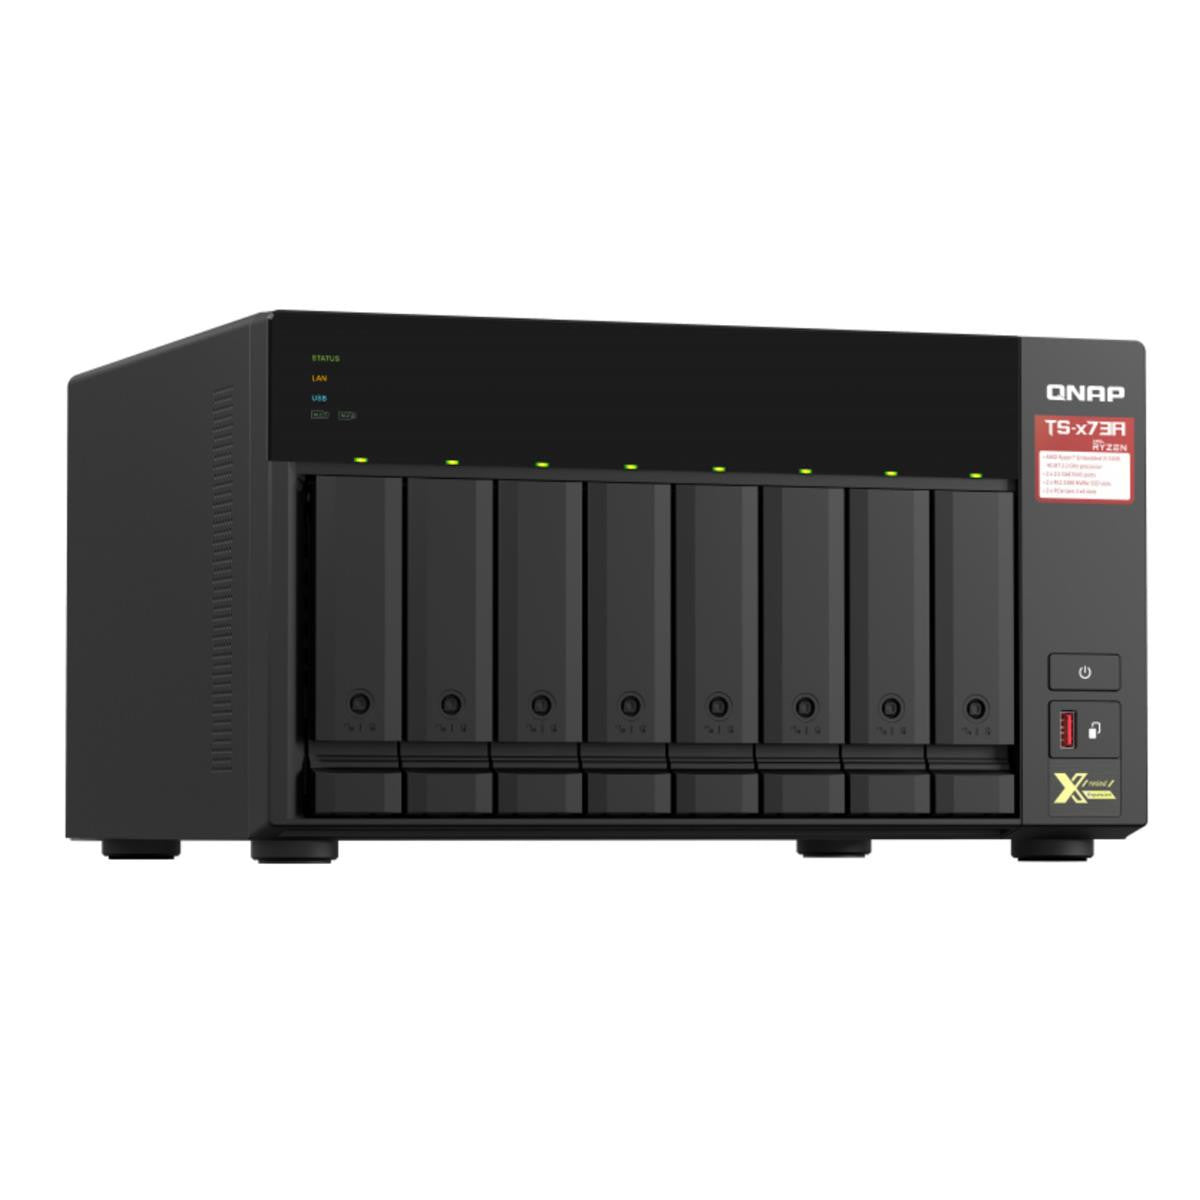 QNAP TS-873A 8-BAY NAS with 16GB DDR4 RAM and 64TB (8x8TB) Seagate Ironwolf NAS Drives Fully Assembled and Tested